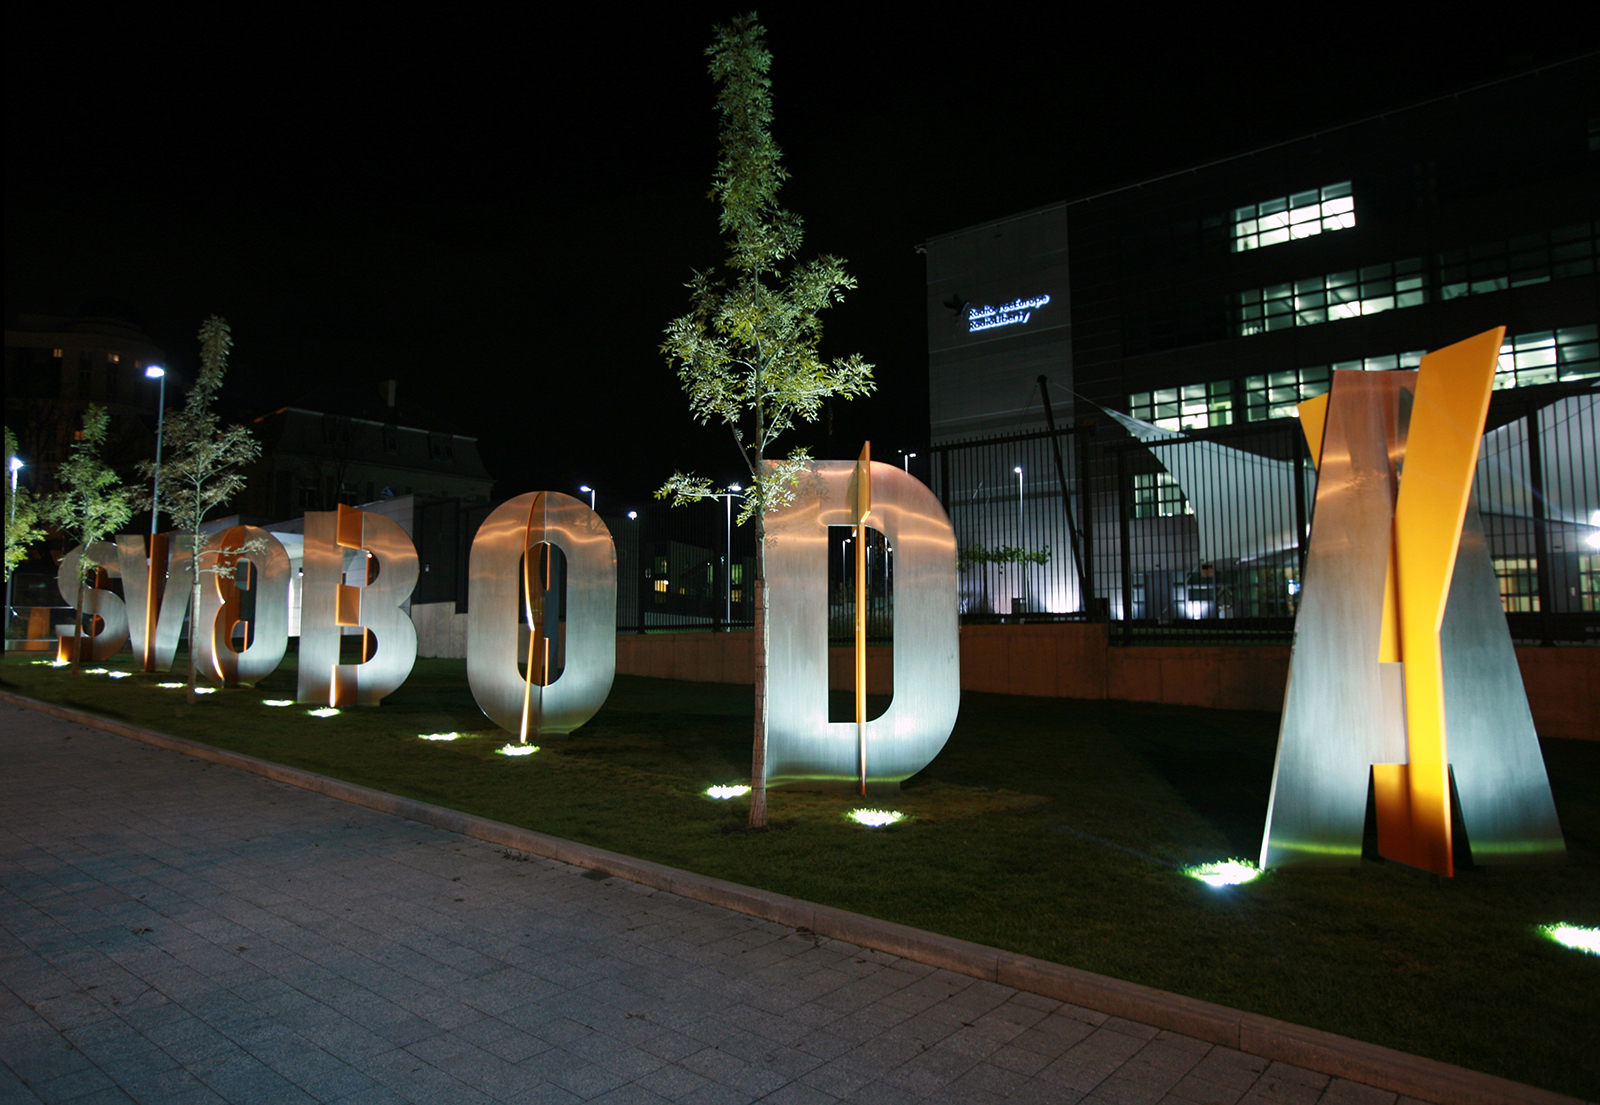 Night view of type sculpture